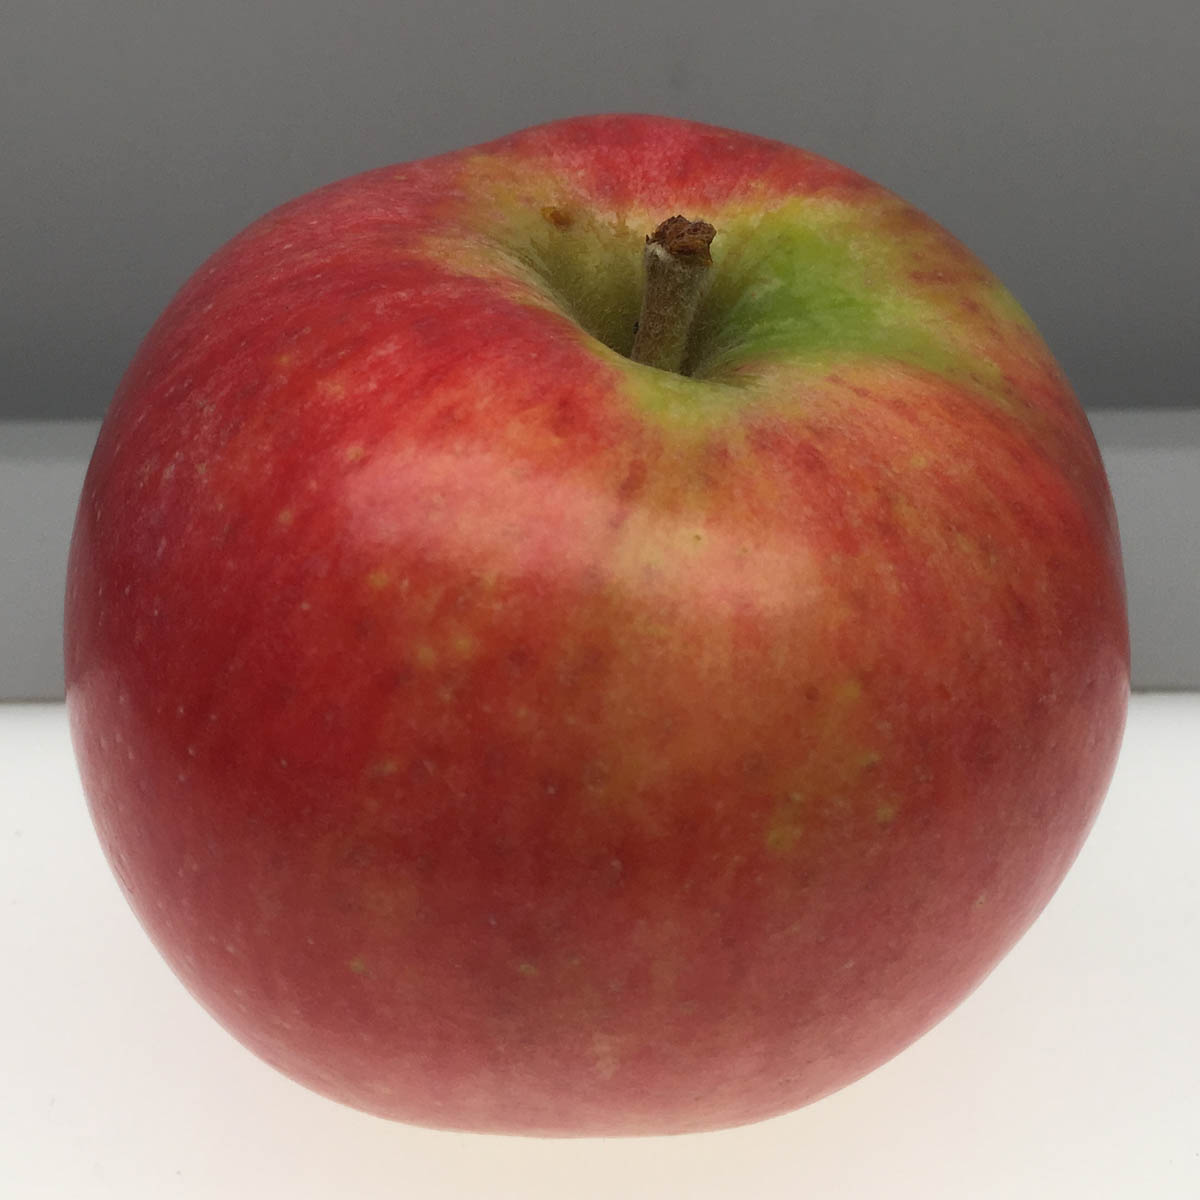 Red Astrachan apple